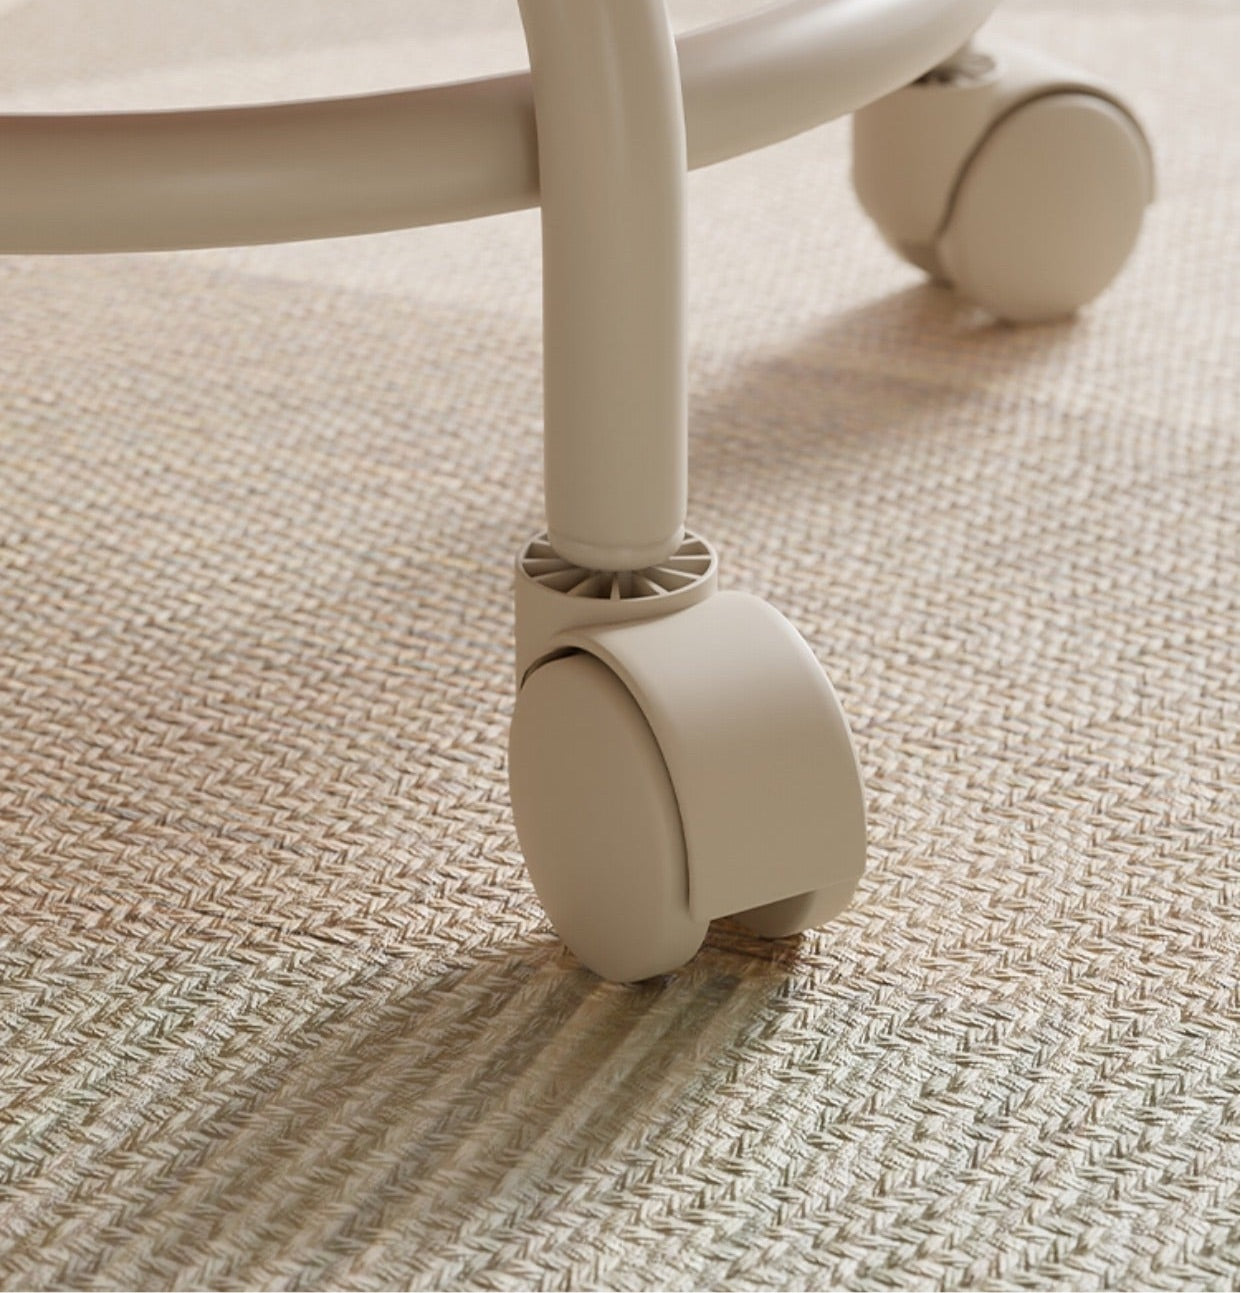 Lowe Pulley Baby Chair from maija